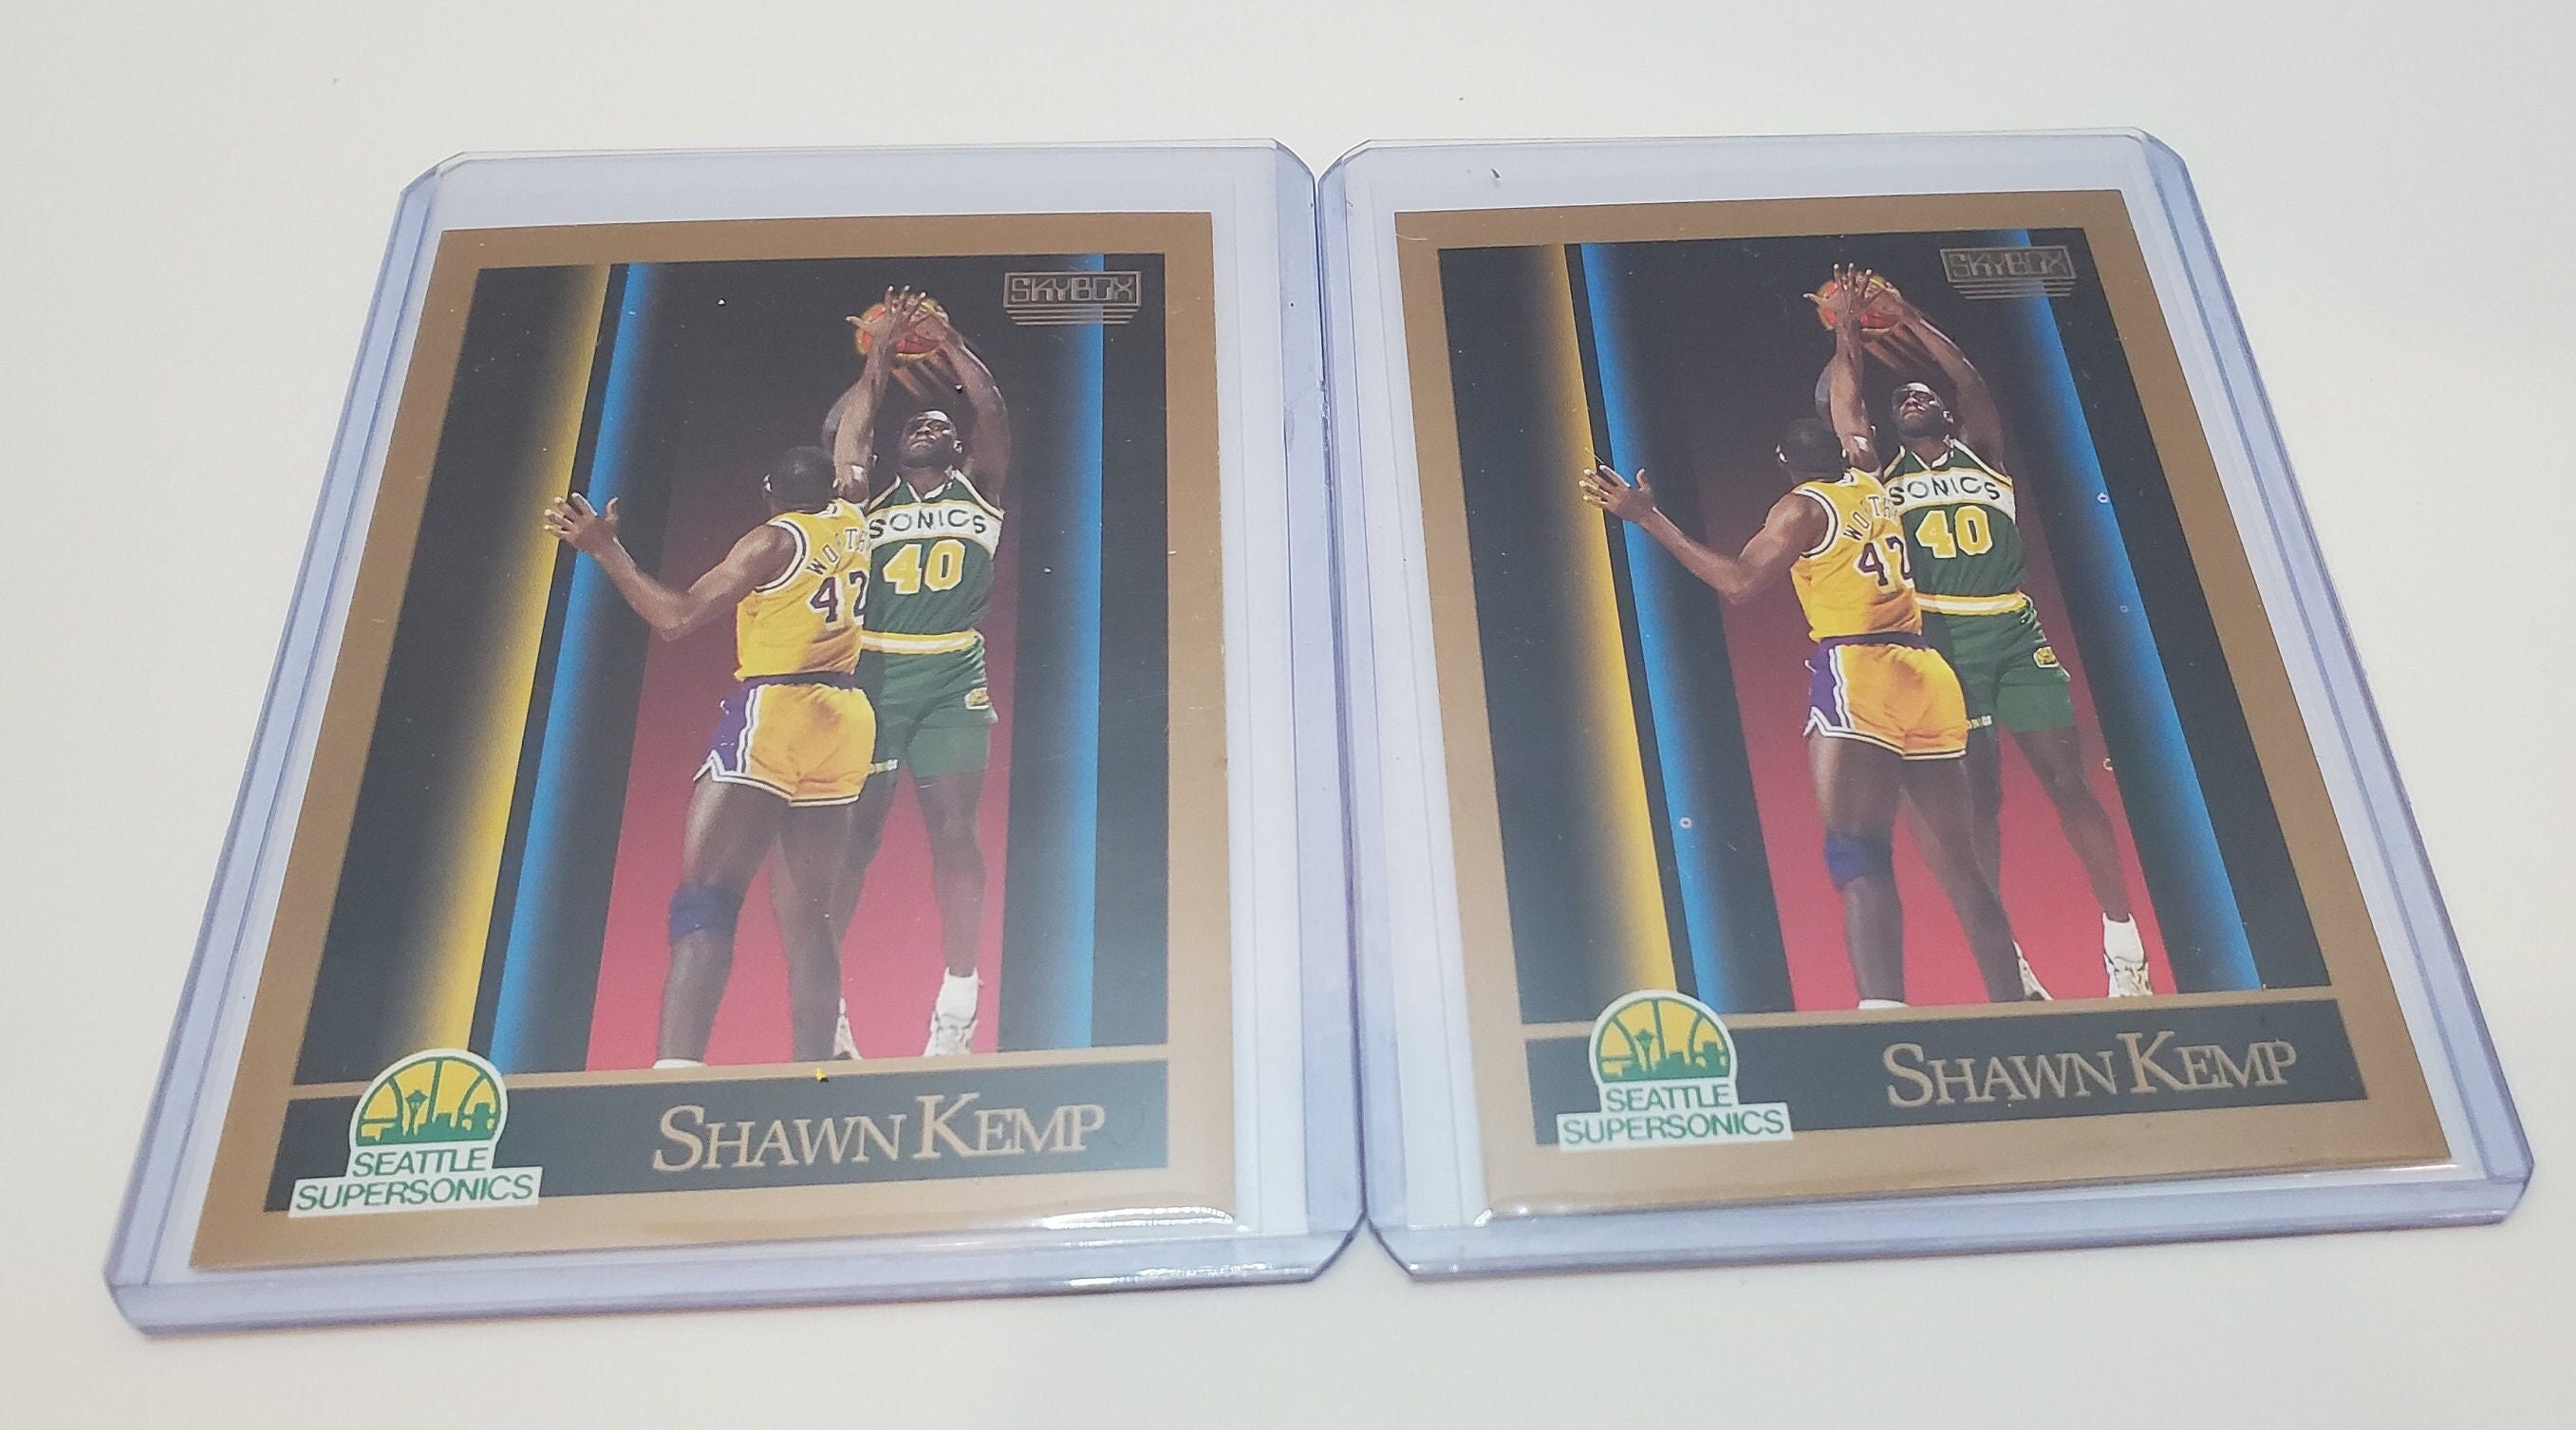 Shawn Kemp 1995-96 Fleer NBA Jam Session #13 for Sale in